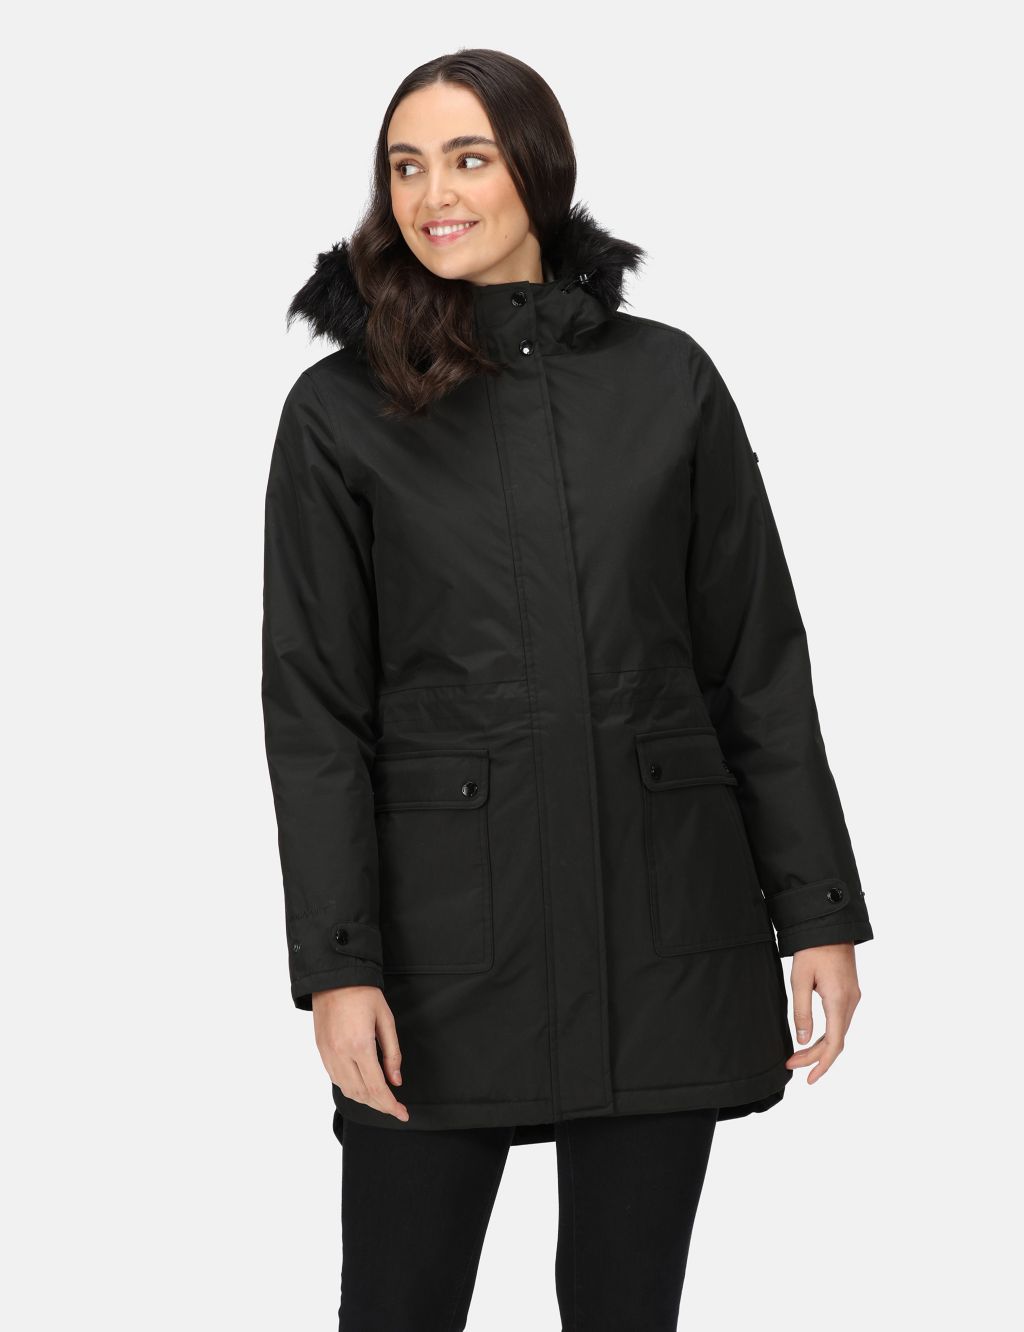 Page 8 - Women’s Coats & Jackets | M&S